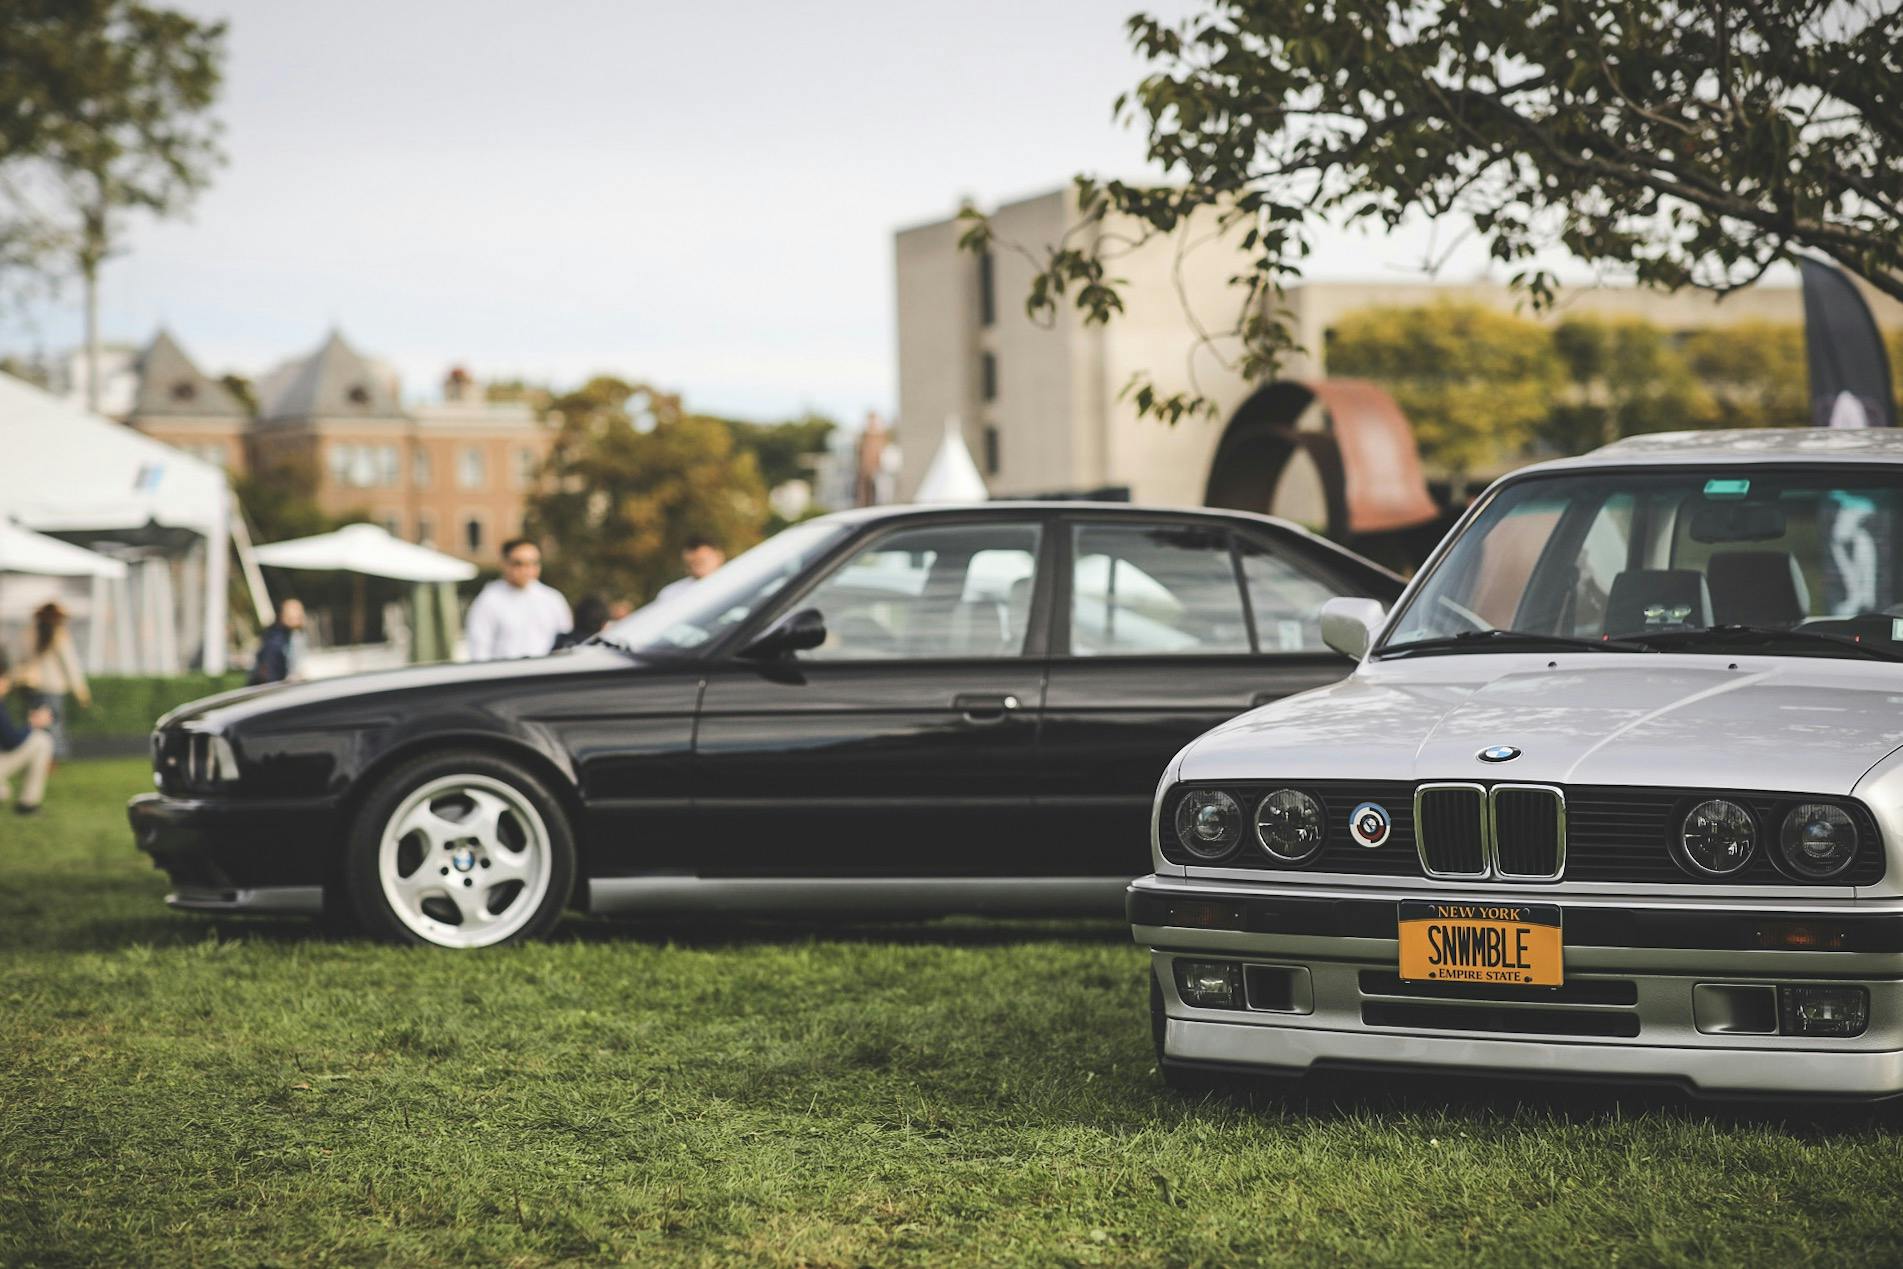 BMW with novelty license plate is featured at RADwood event